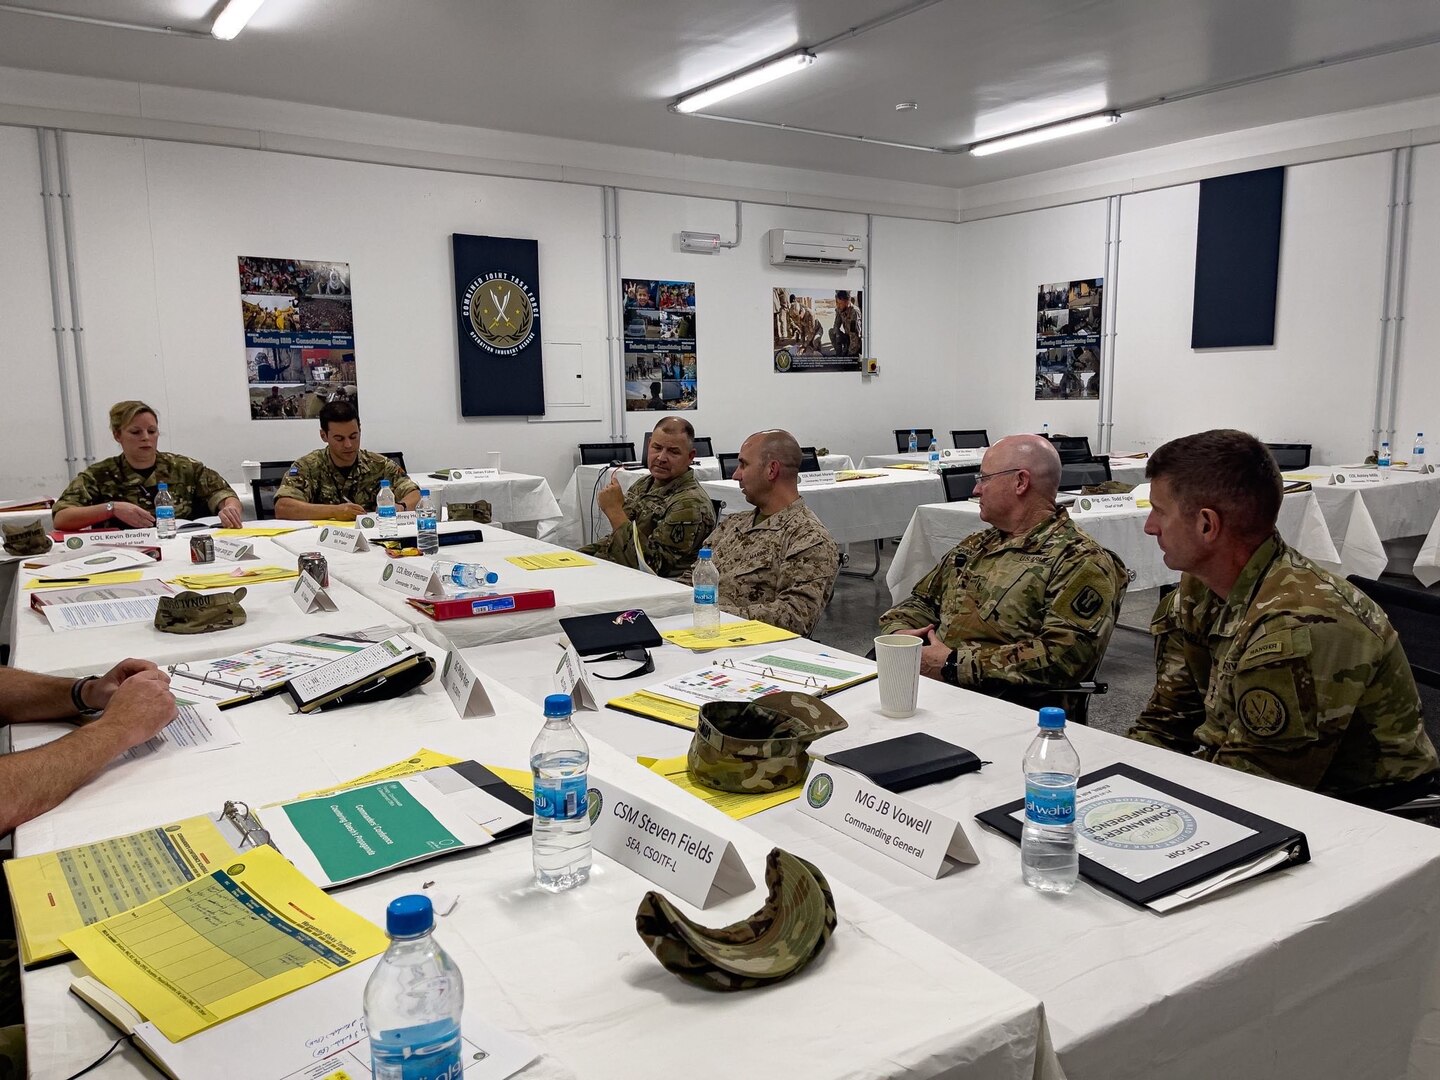 Command teams and leaders from across Combined Joint Task Force - Operation Inherent Resolve attended the CJTF-OIR Commanders Conference.